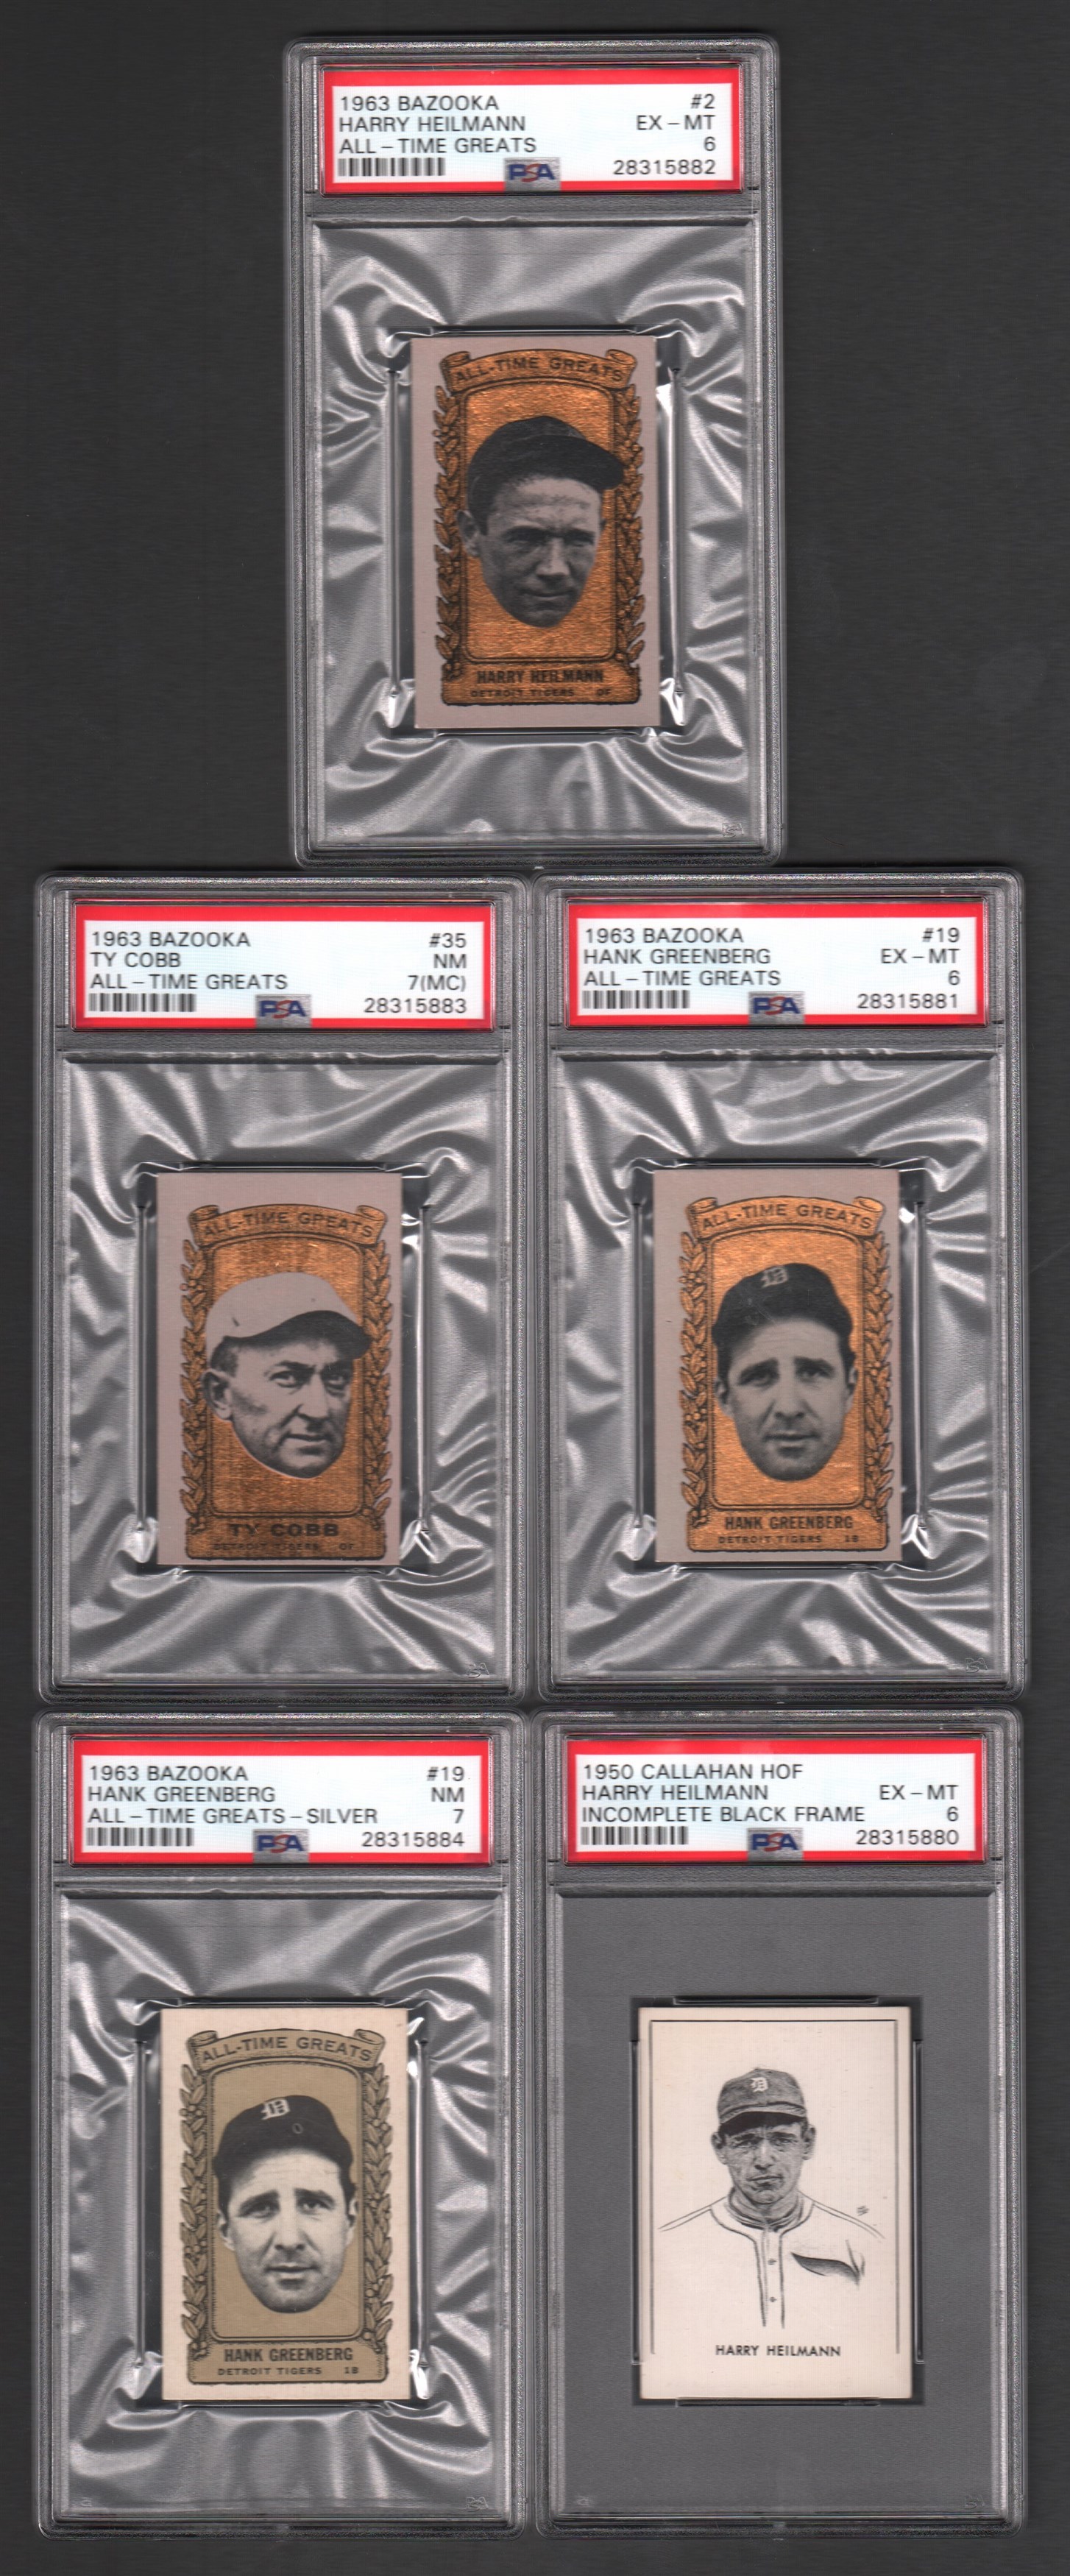 - 1950-1963 Detroit Tigers Oddball Lot of Five PSA Graded Cards with Hank Greenberg and Ty Cobb